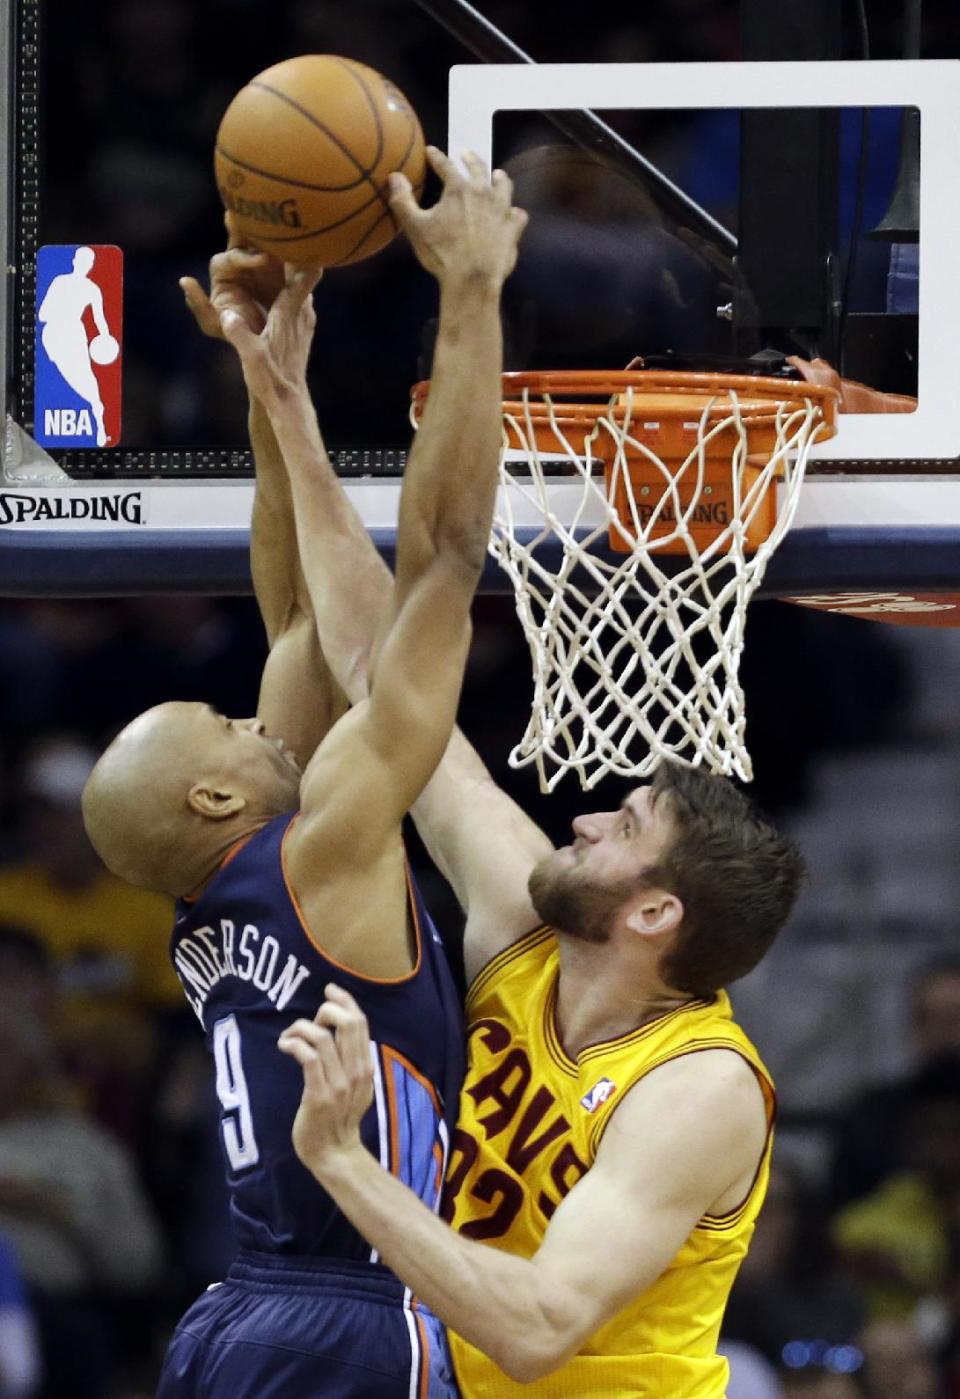 Cleveland Cavaliers' Spencer Hawes, right, fouls Charlotte Bobcats' Gerald Henderson (9) in the second quarter of an NBA basketball game on Saturday, April 5, 2014, in Cleveland. (AP Photo/Mark Duncan)